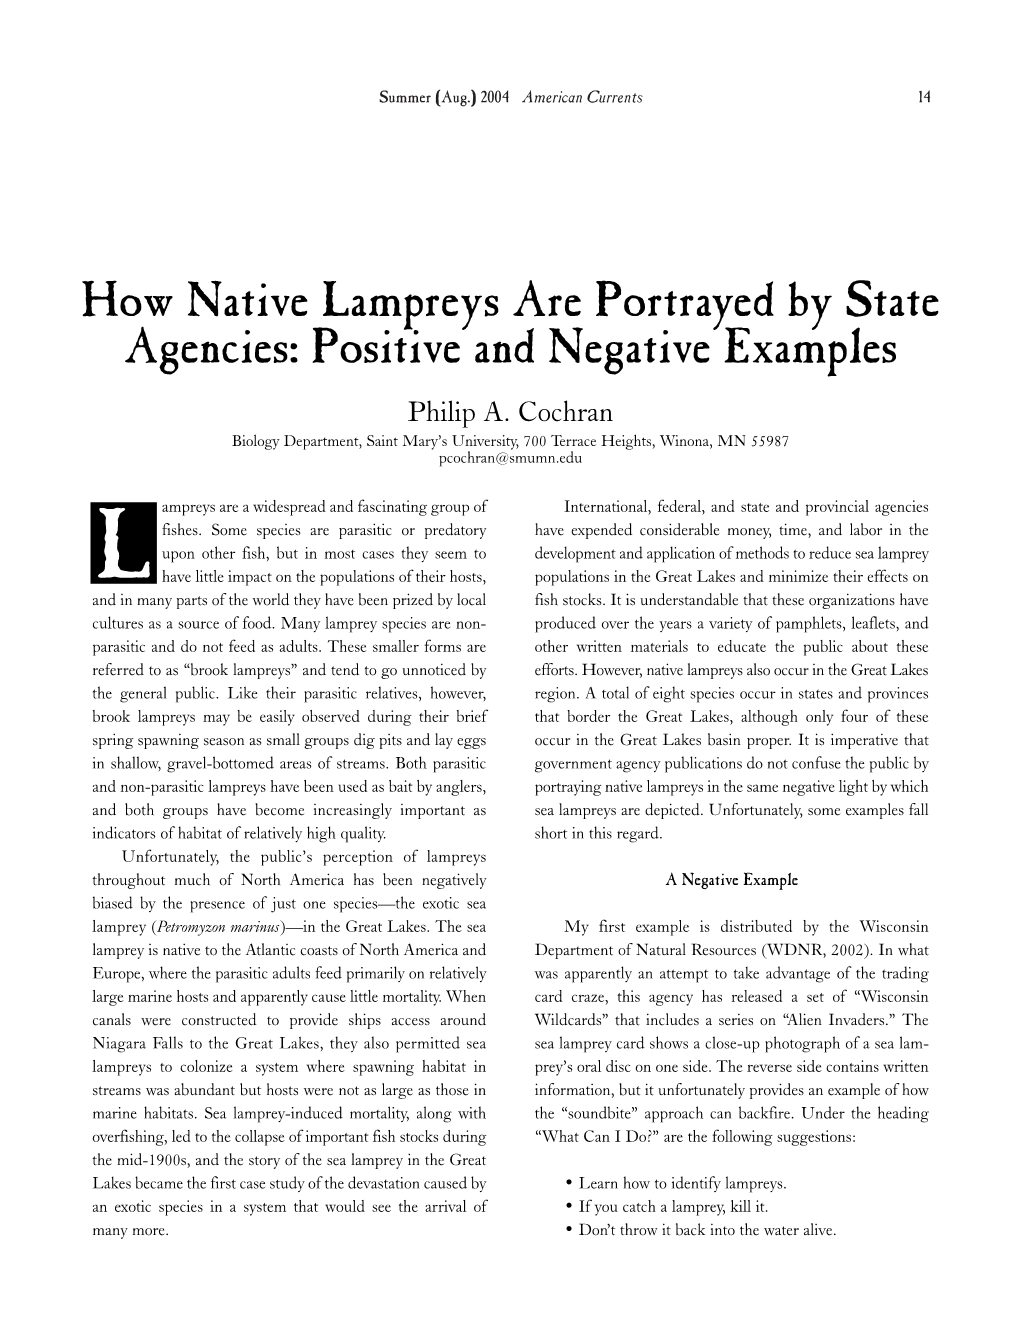 How Native Lampreys Are Portrayed by State Agencies: Positive and Negative Examples Philip A